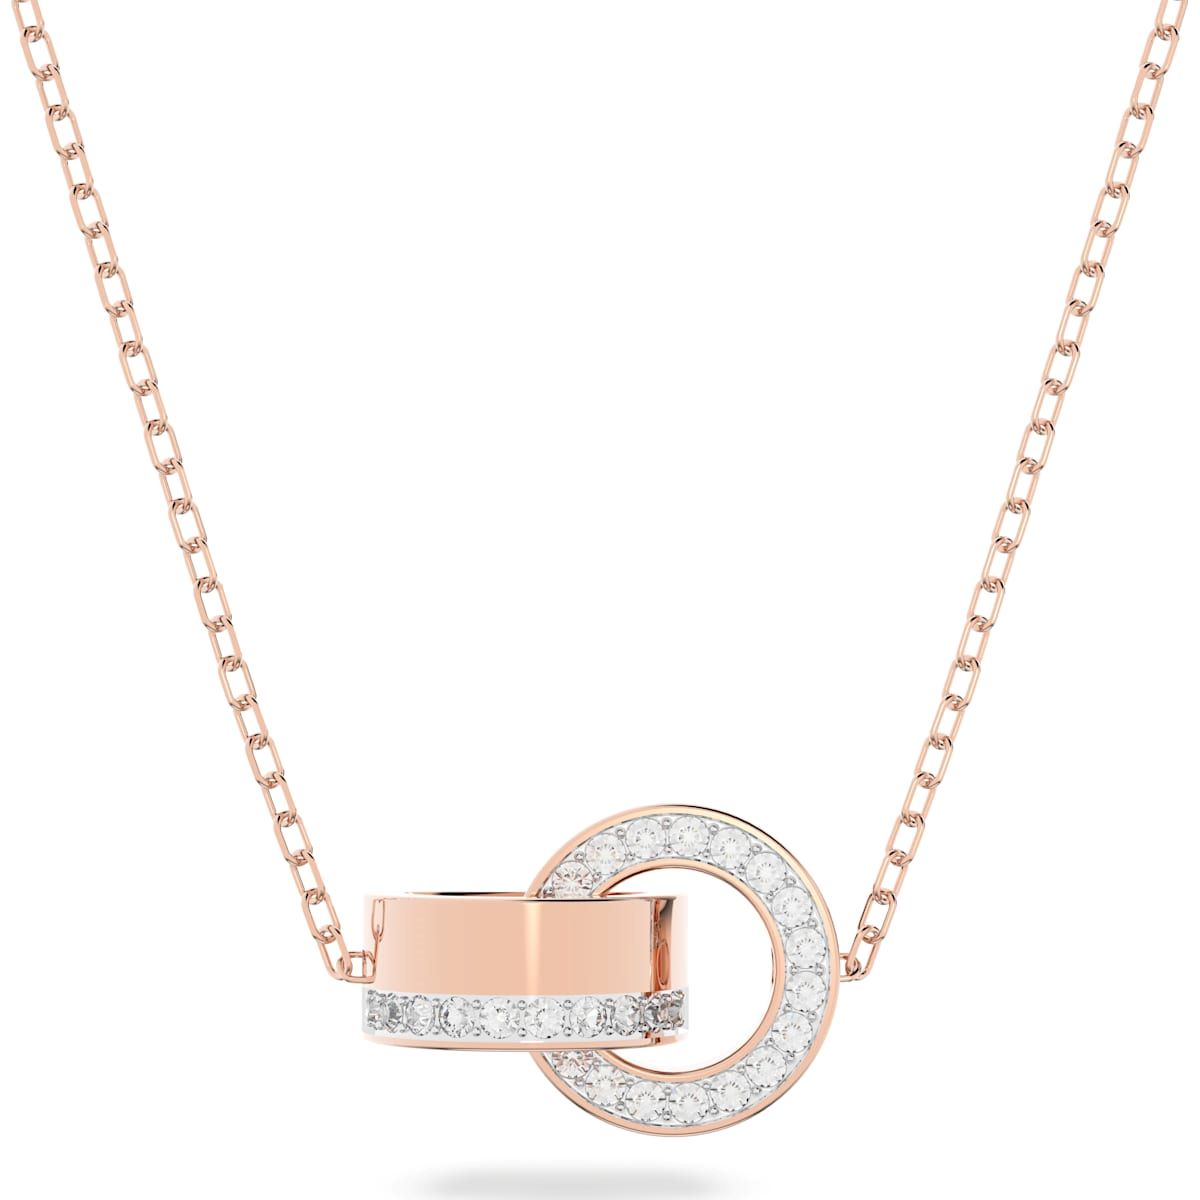 Swarovski Hollow Rose Gold Tone Plated Small White Crystal Intertwined Pendant